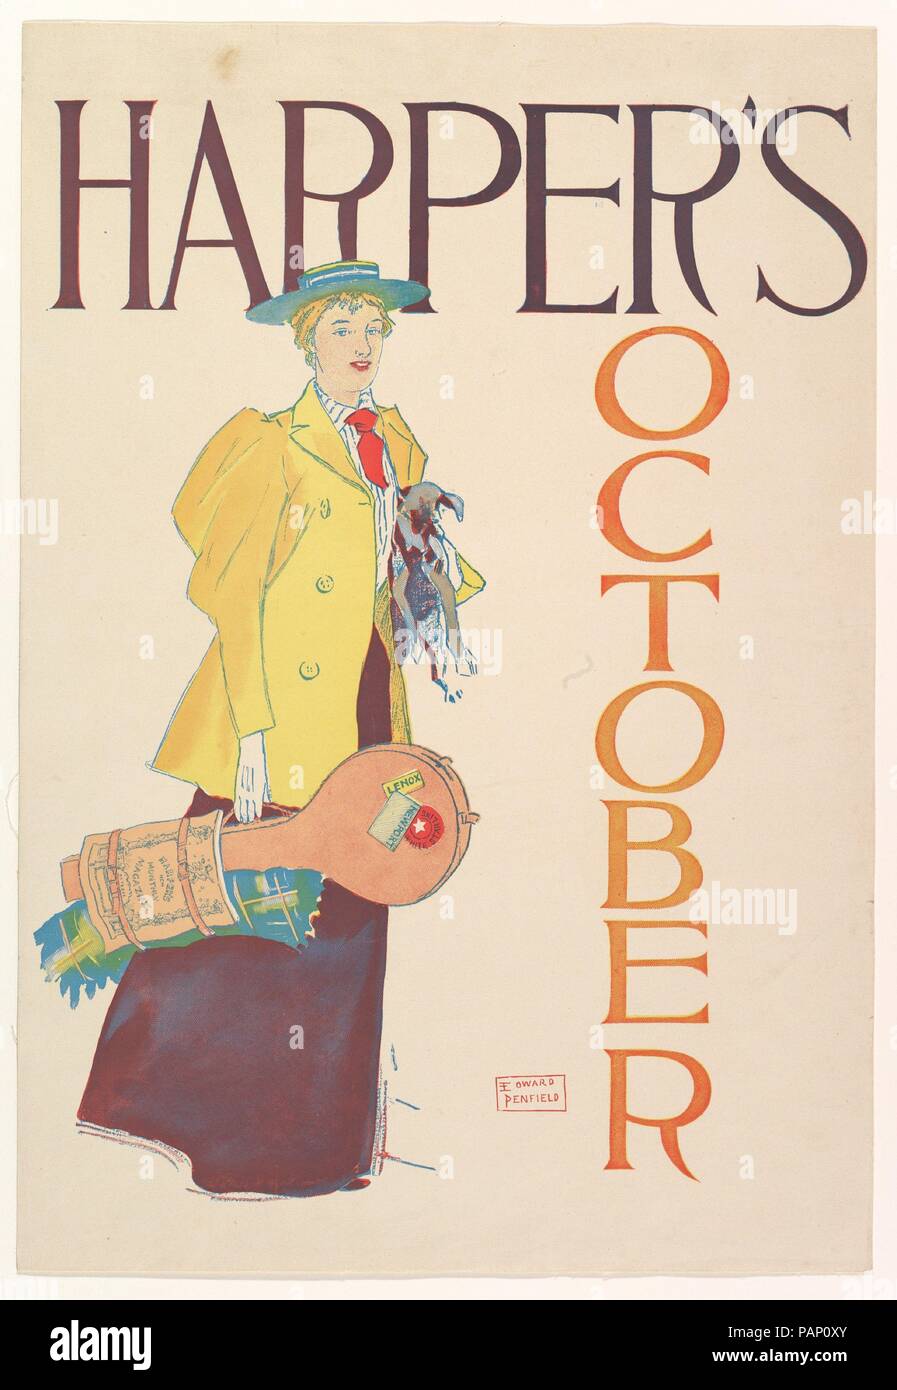 Harper's, October. Artist: Edward Penfield (American, Brooklyn, New York 1866-1925 Beacon, New York). Dimensions: Sheet: 16 5/8 × 11 7/16 in. (42.3 × 29 cm). Publisher: Harper and Brothers, Publishers. Date: 1893. Museum: Metropolitan Museum of Art, New York, USA. Stock Photo